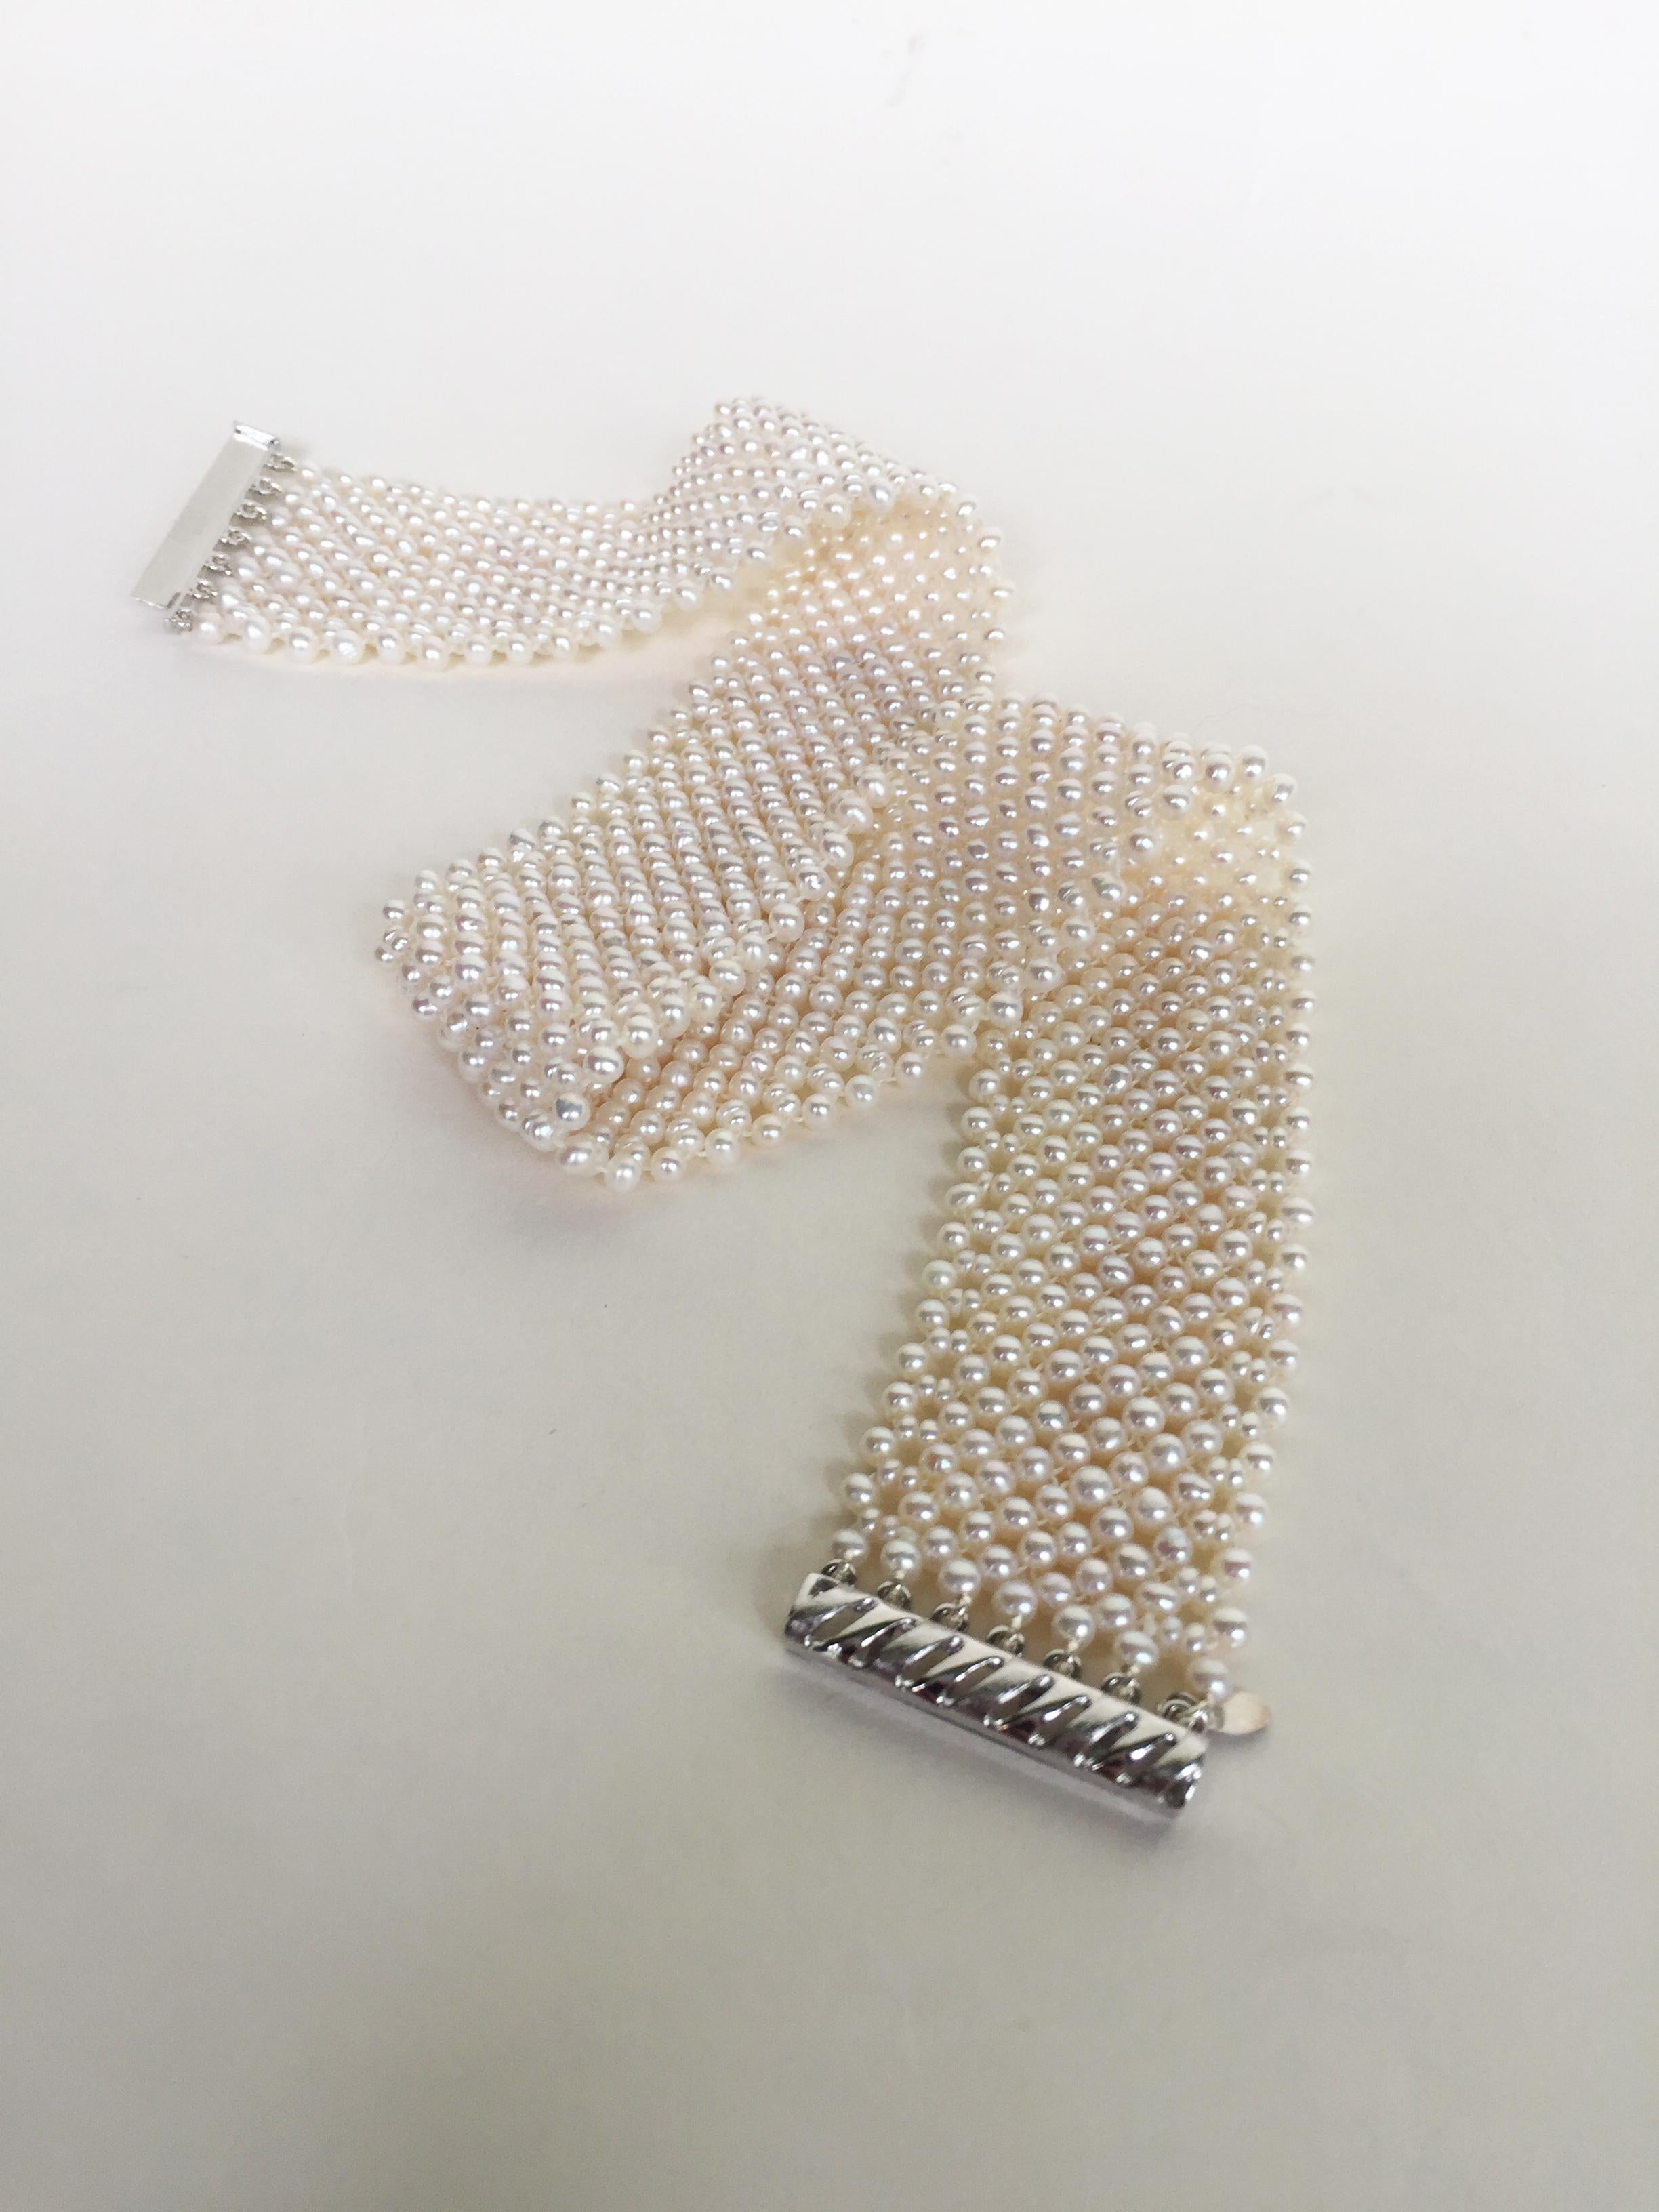 This woven white pearl choker with a rhodium-plated sterling silver sliding clasp is handwoven by Marina J. Each glowing white pearl (2.5-3mm) was handpicked to create an elegant and sophisticated lace-like design. This pearl choker is 1 inch wide